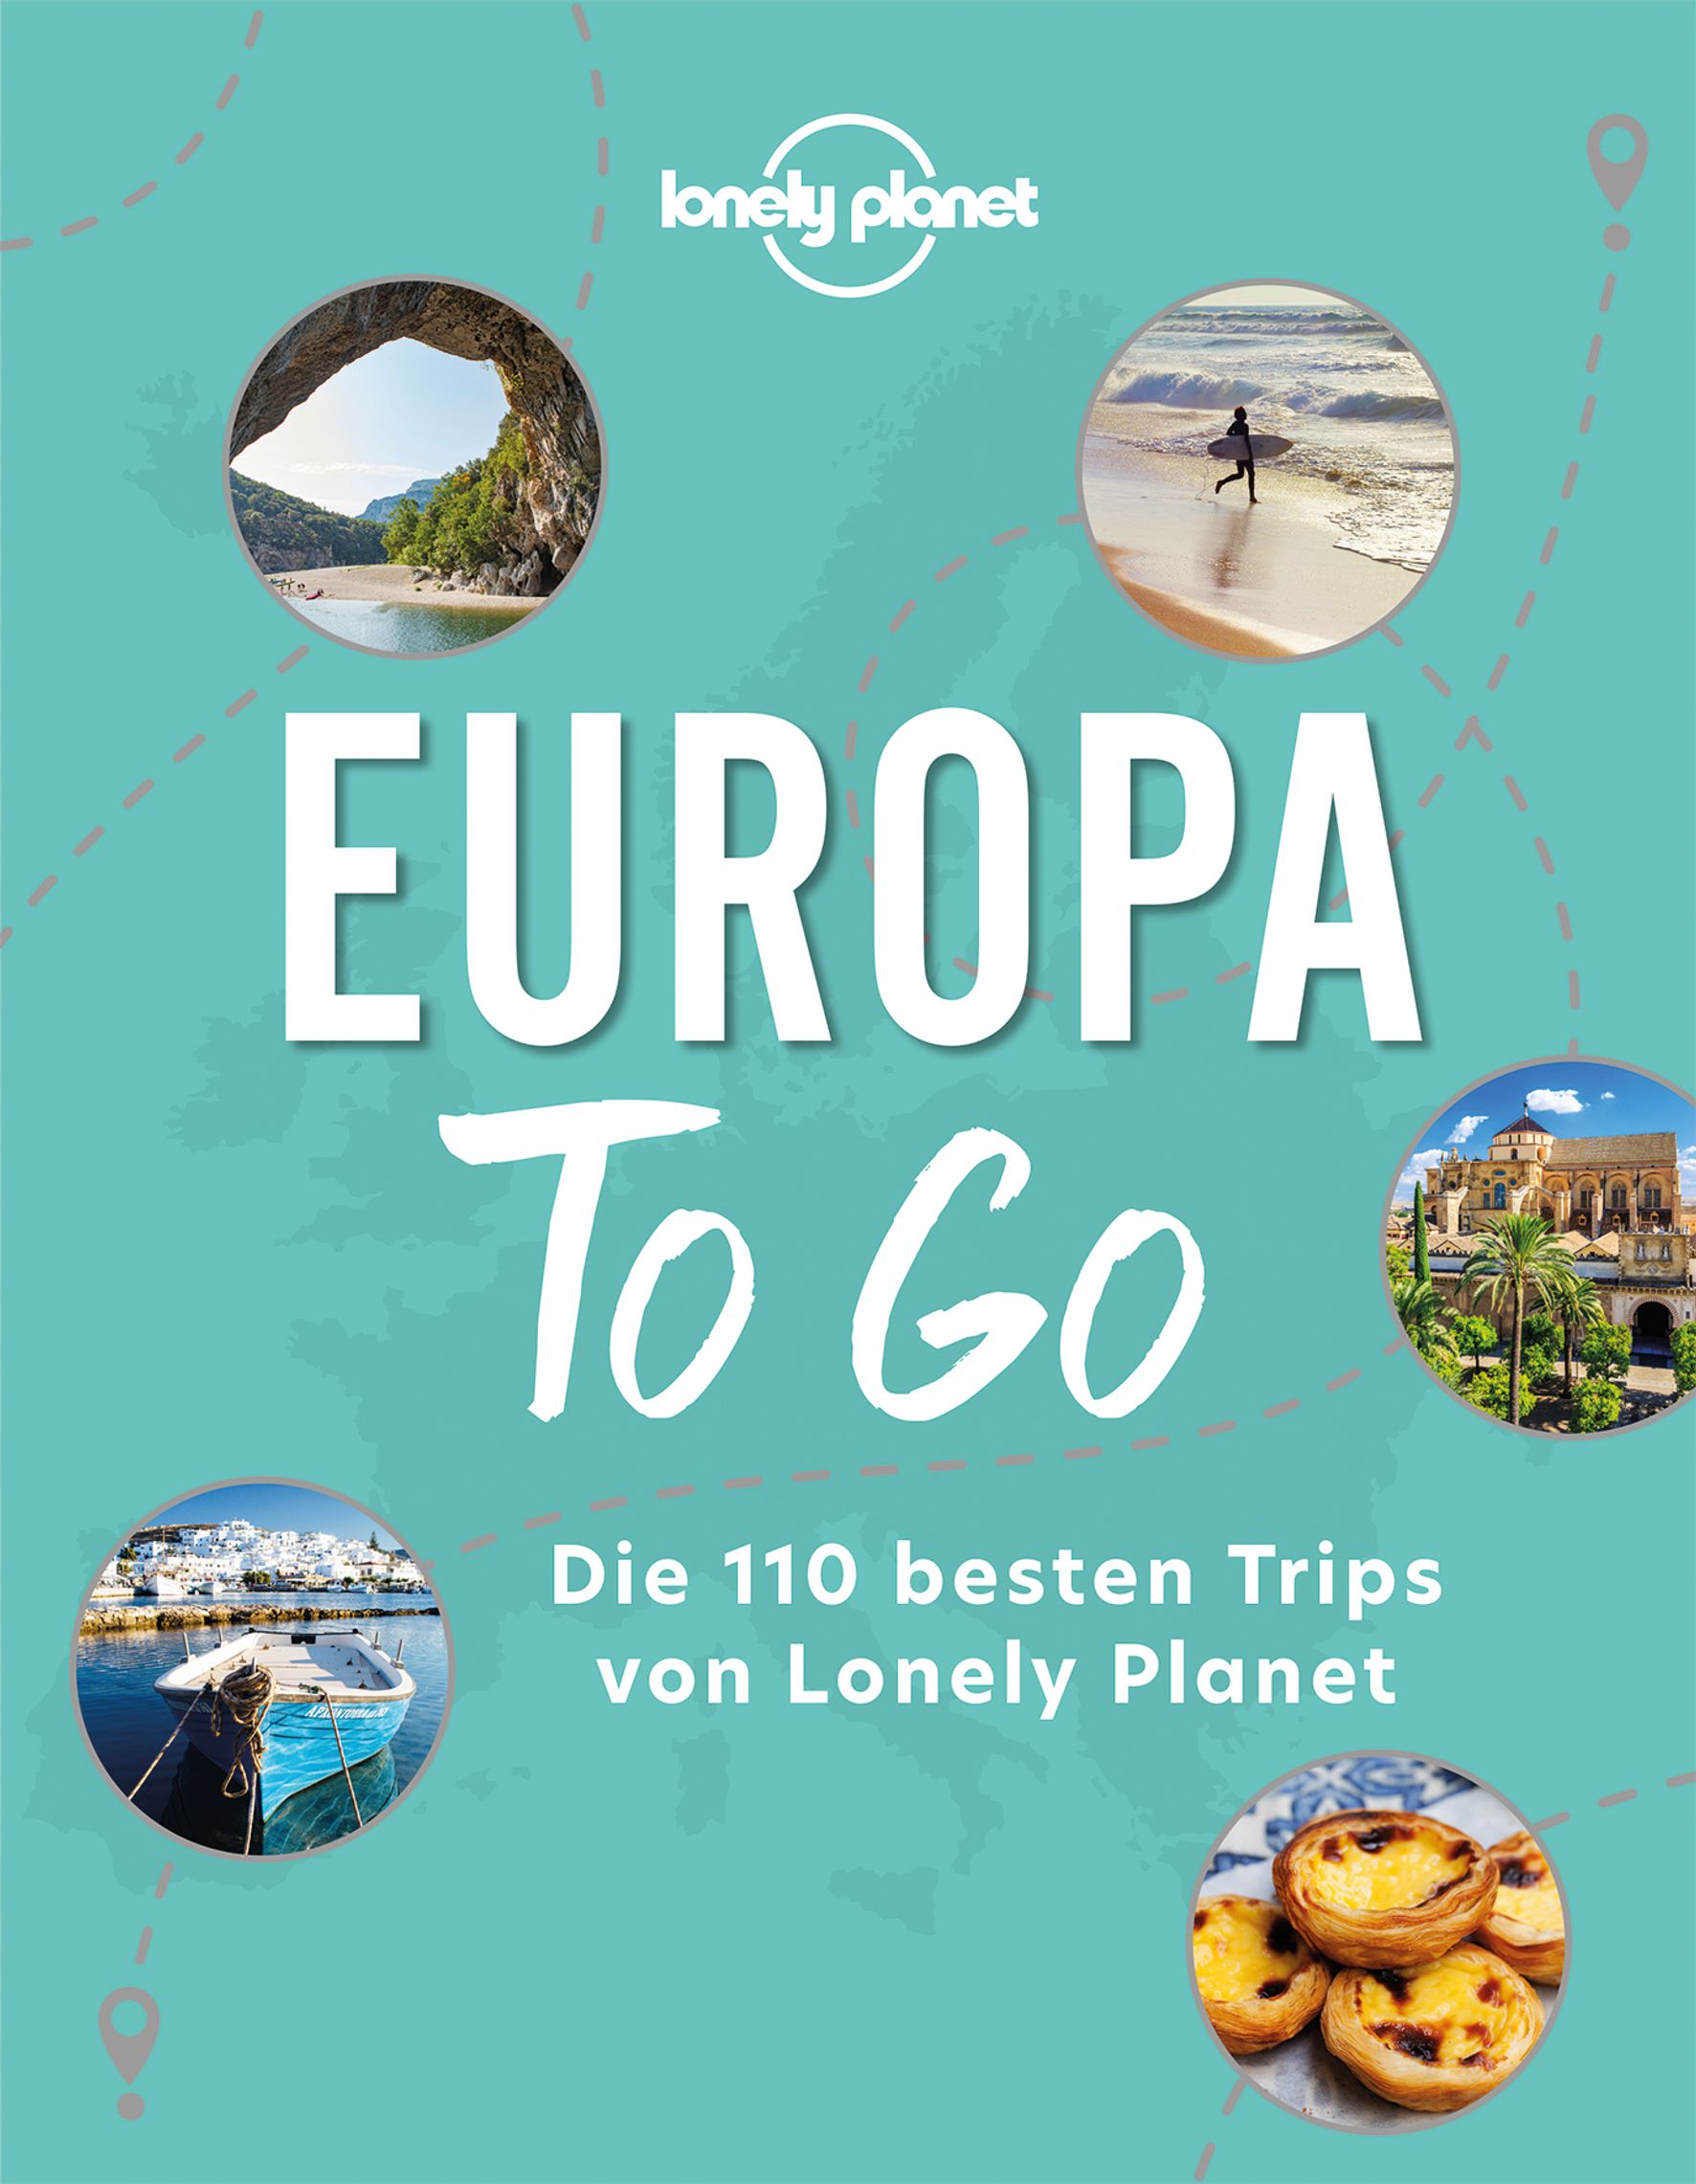 Lonely Planet Europa to go